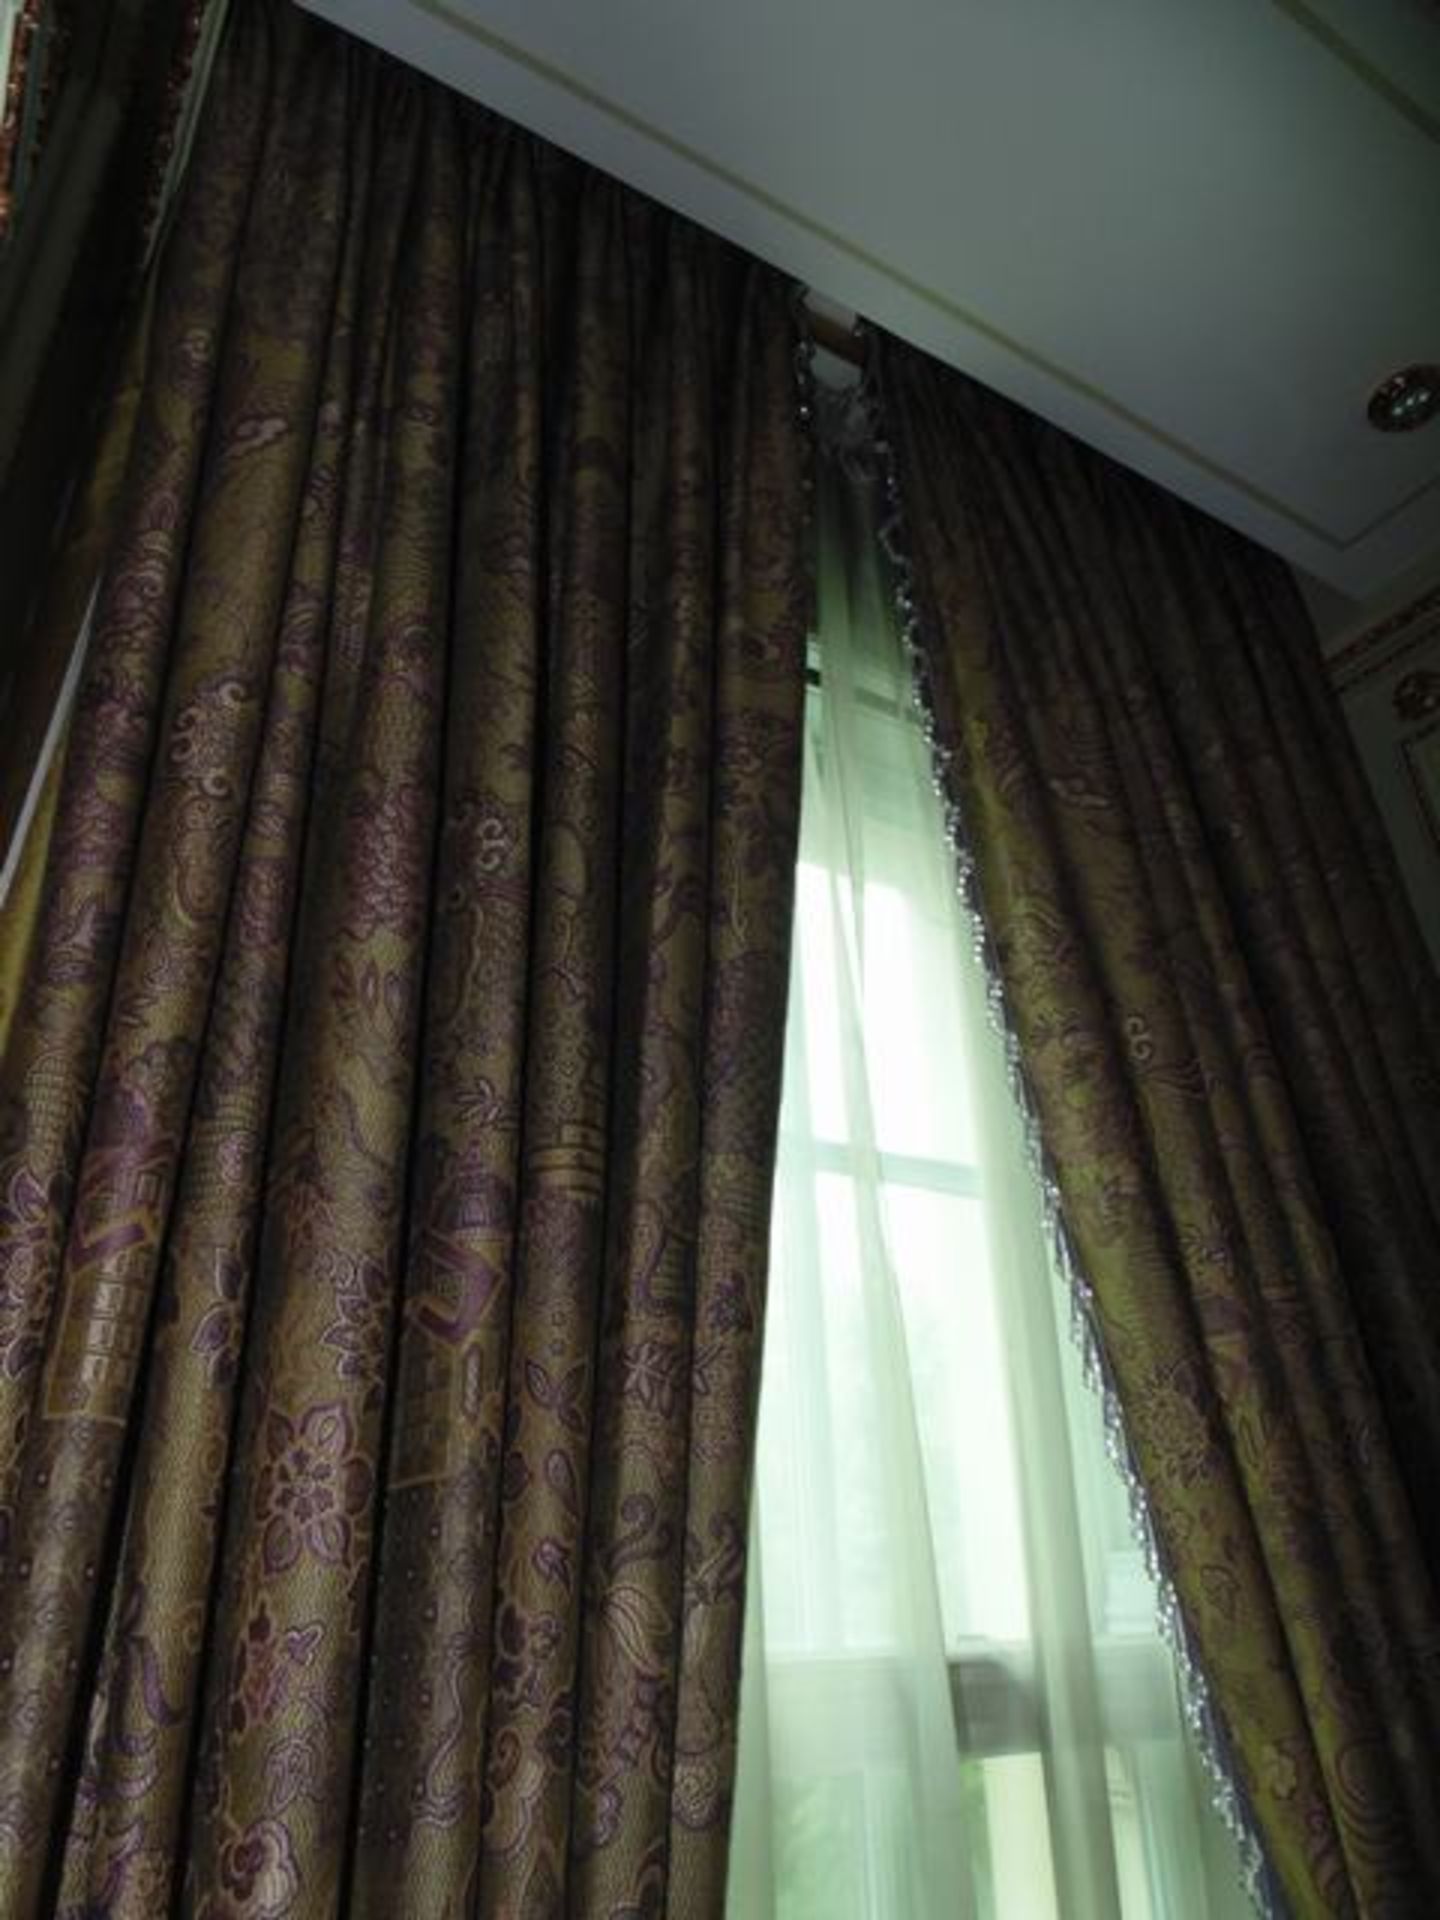 A pair of mauve and gold pattern curtains supplied by Jacquard, gold and mauve fabric from Marvi